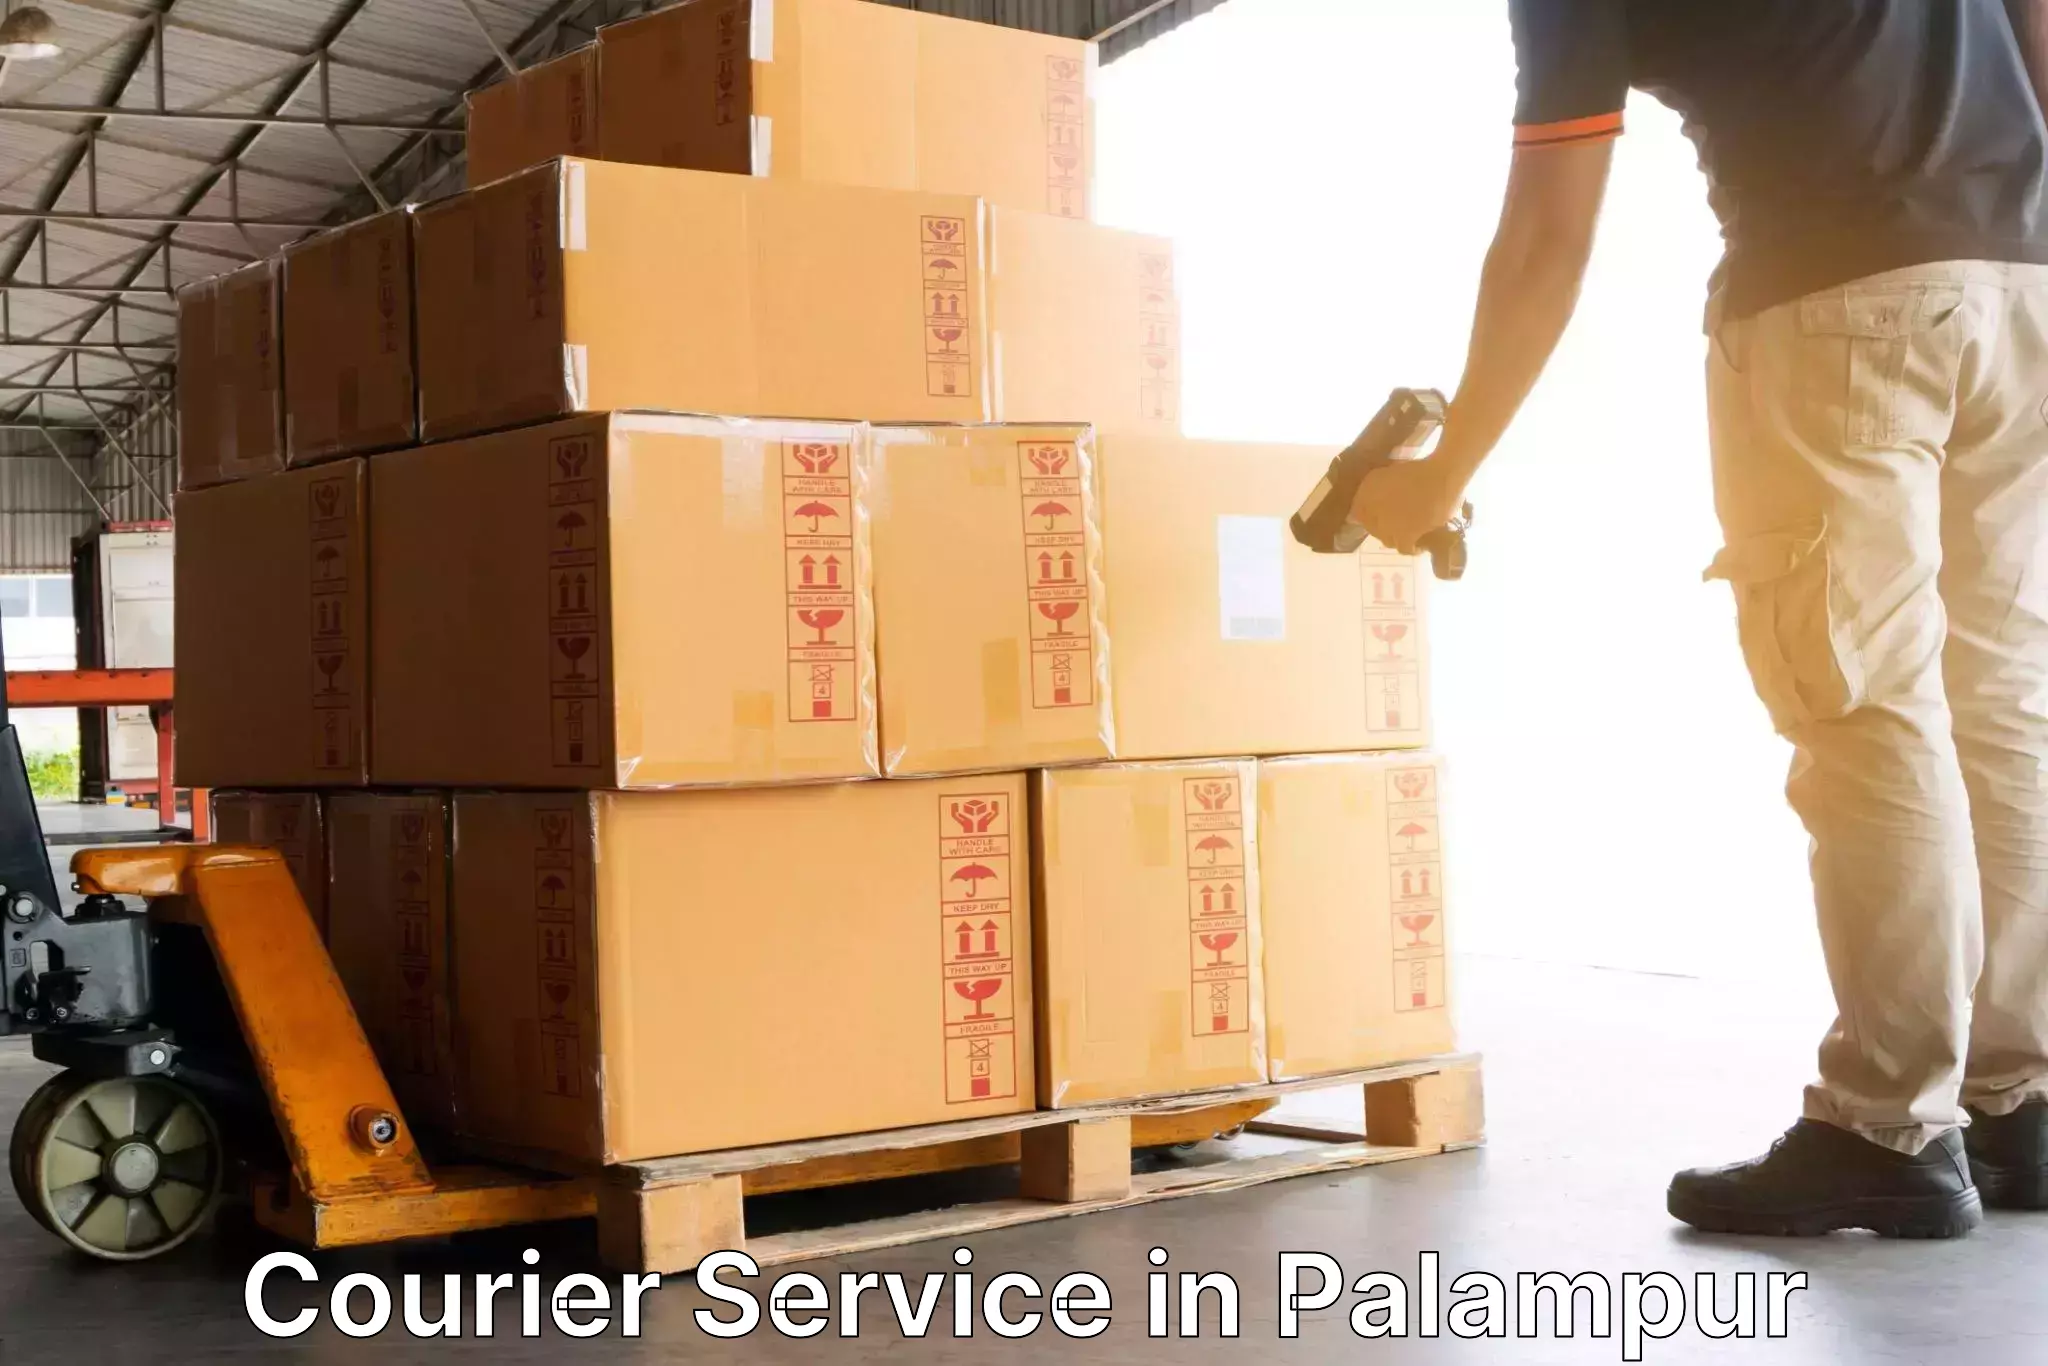 Logistics and distribution in Palampur